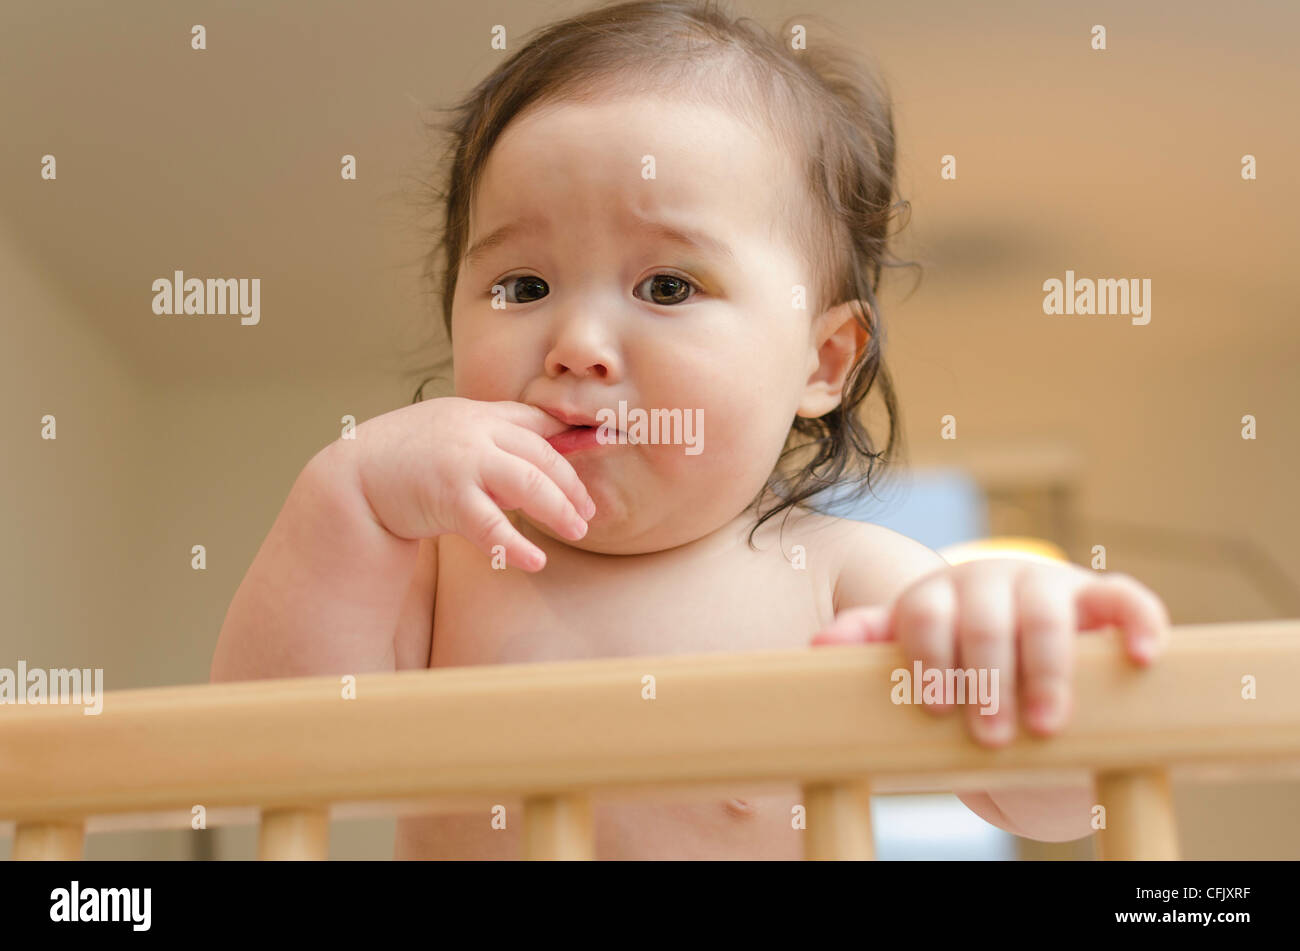 Cute Baby Girl In A Crib Mixed Ethnicity Asian Caucasian Stock